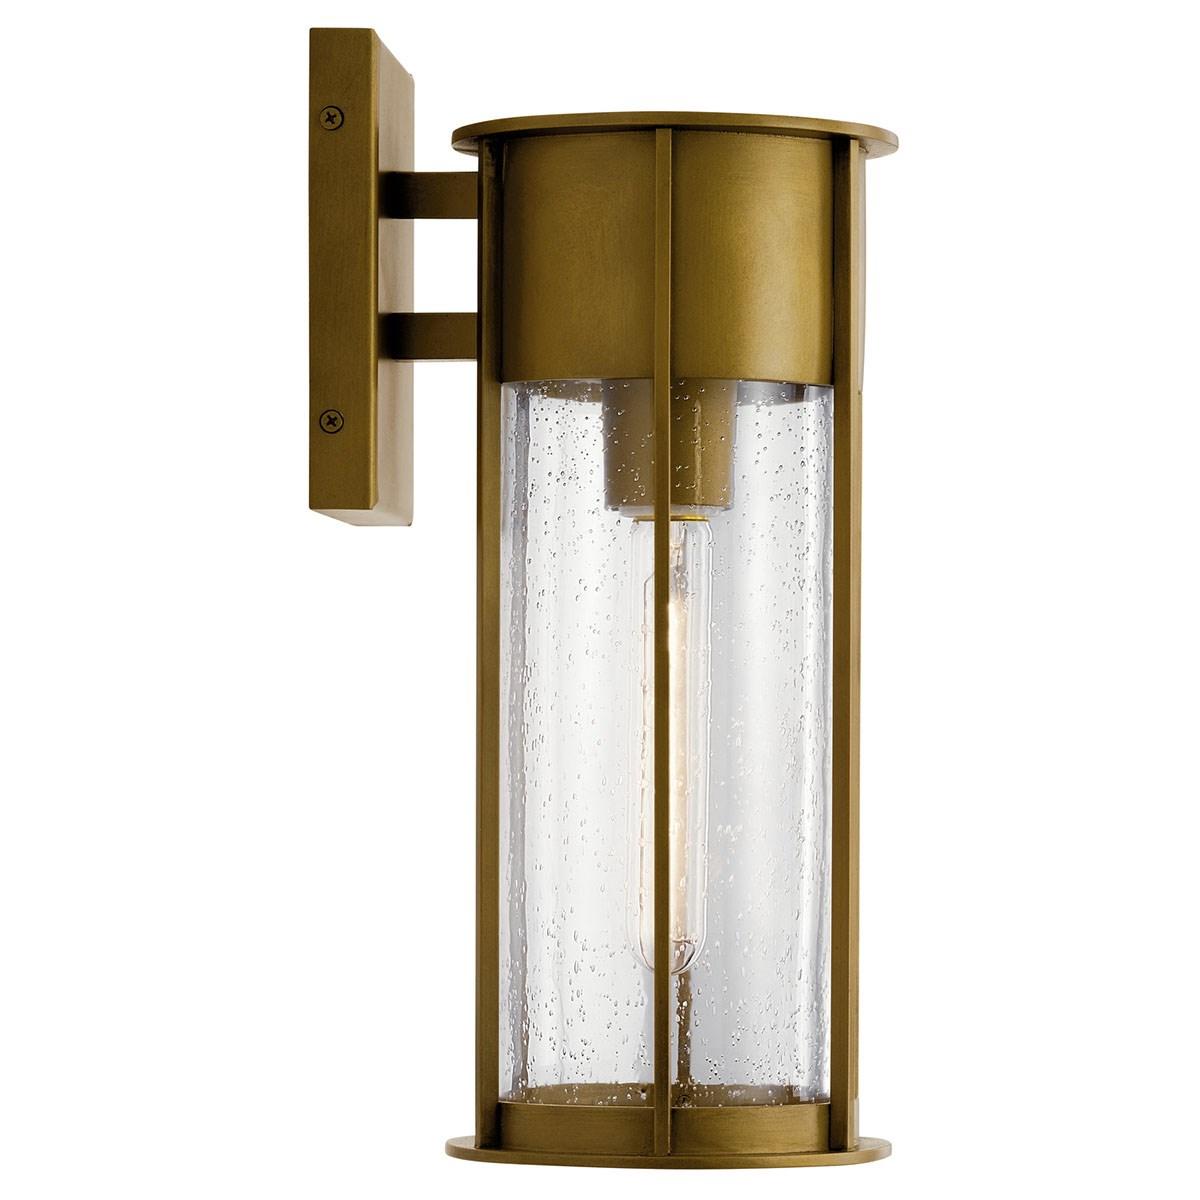 Camillo 15 in. Outdoor Wall Sconce